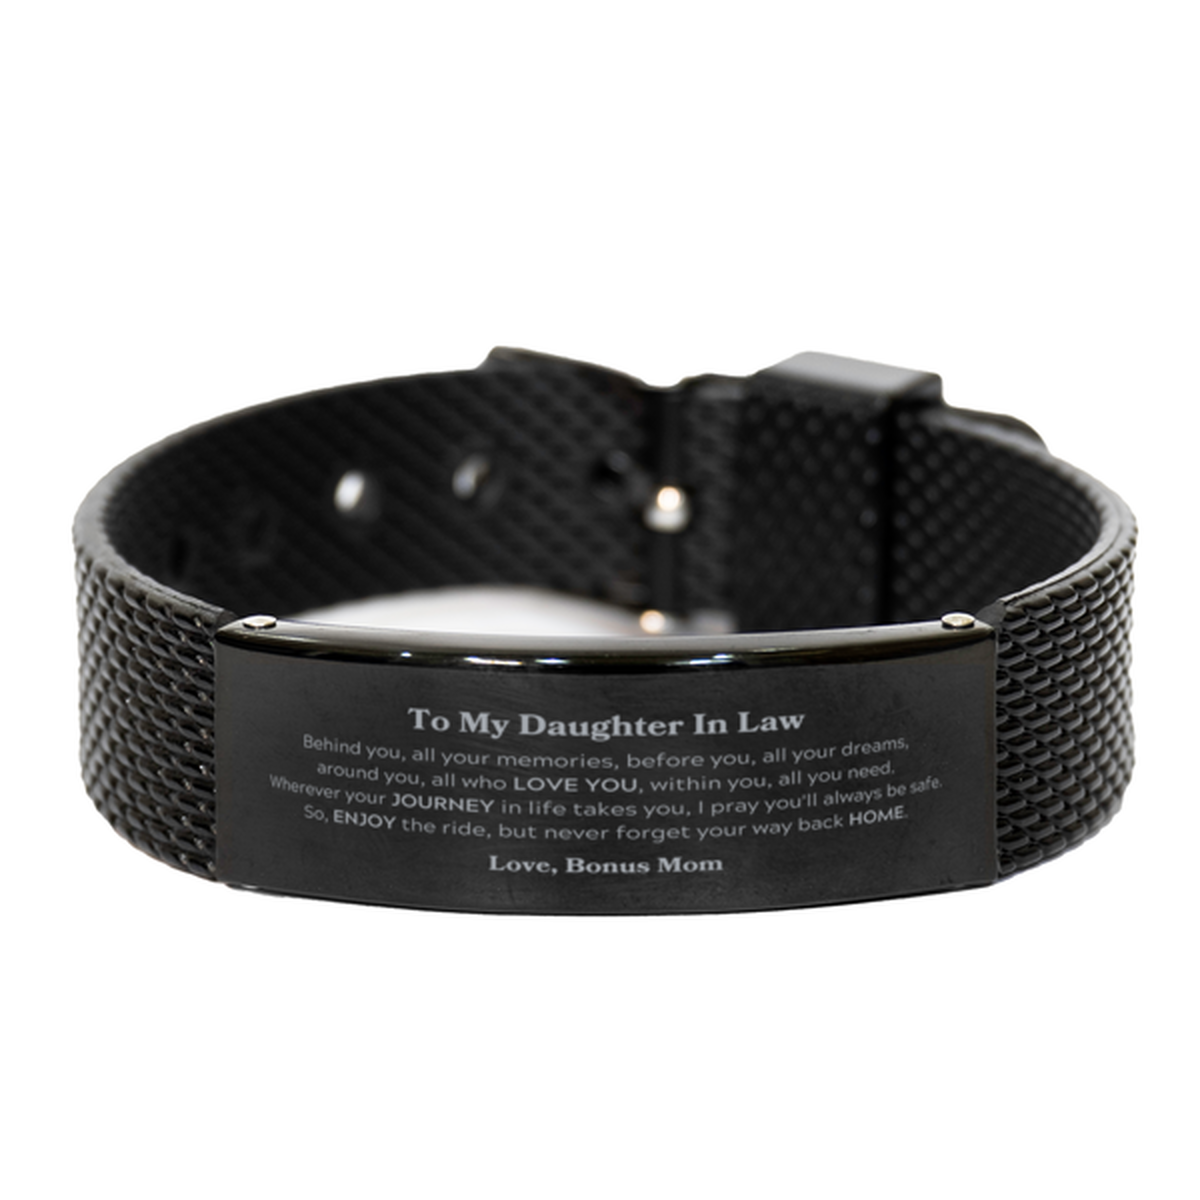 To My Daughter In Law Graduation Gifts from Bonus Mom, Daughter In Law Black Shark Mesh Bracelet Christmas Birthday Gifts for Daughter In Law Behind you, all your memories, before you, all your dreams. Love, Bonus Mom